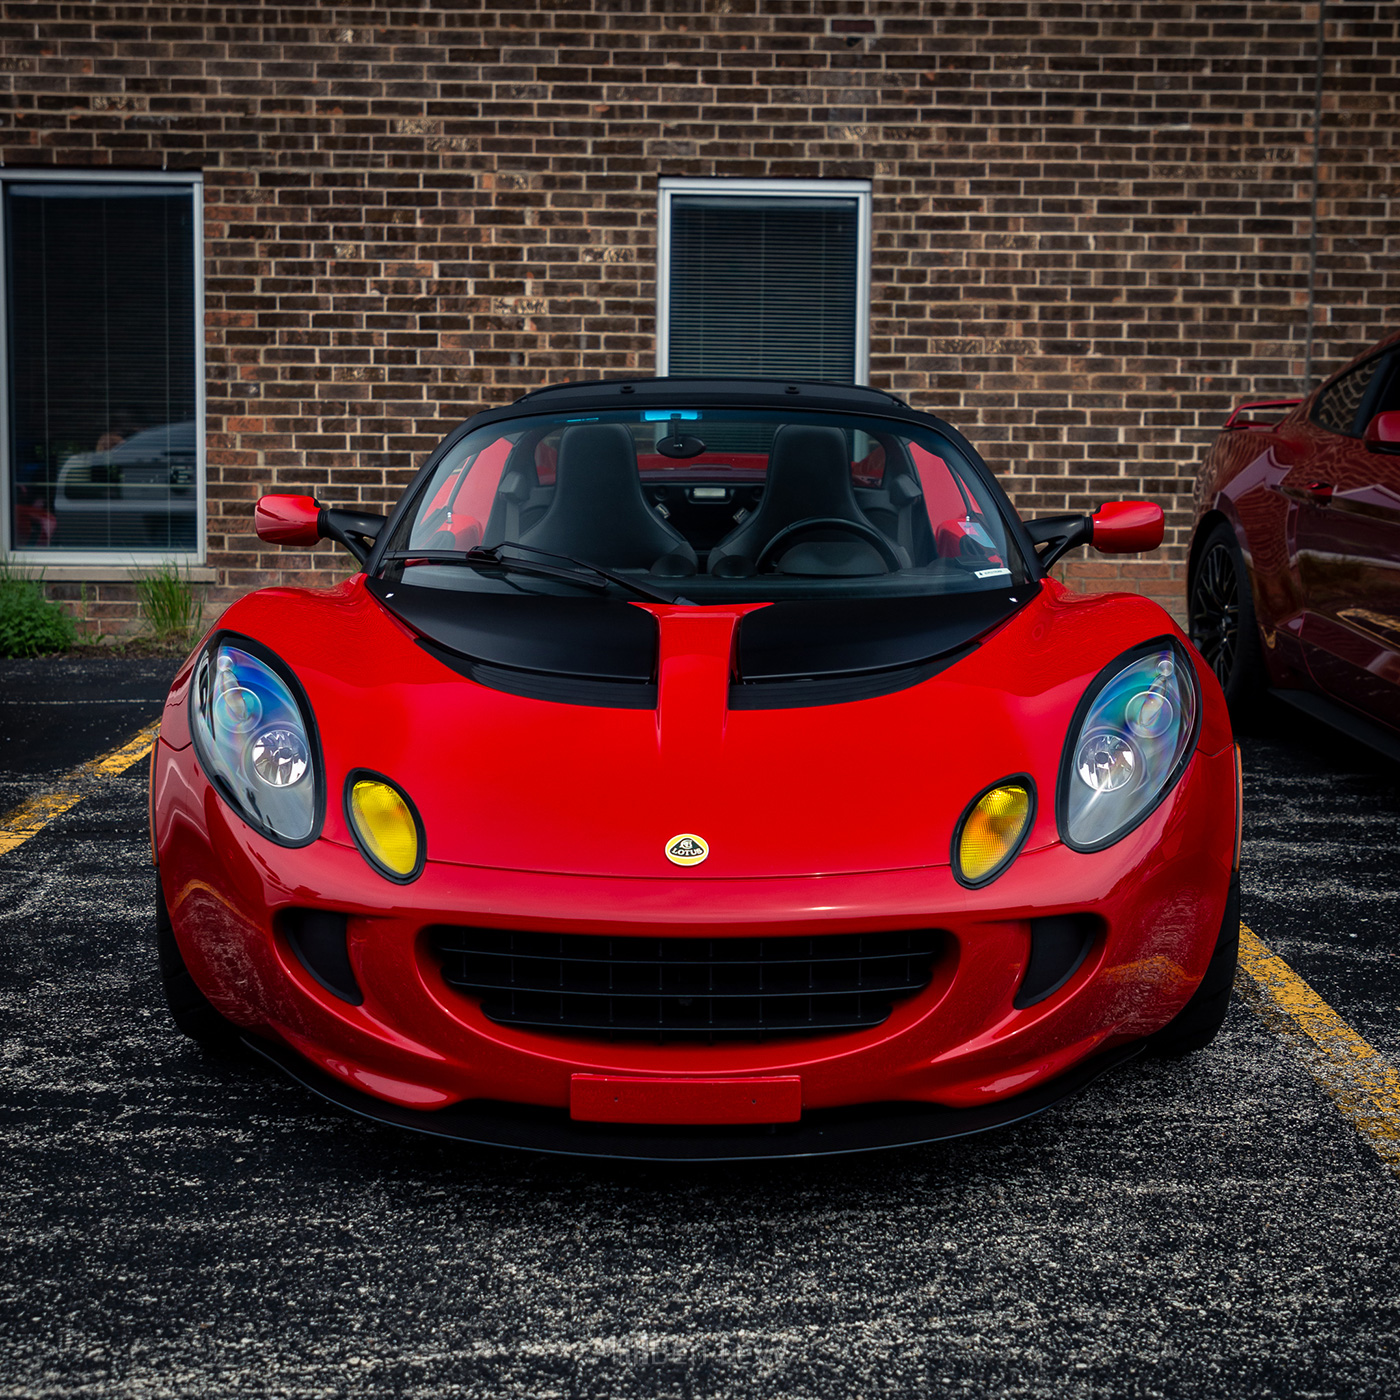 Front of Red Lotus Elise